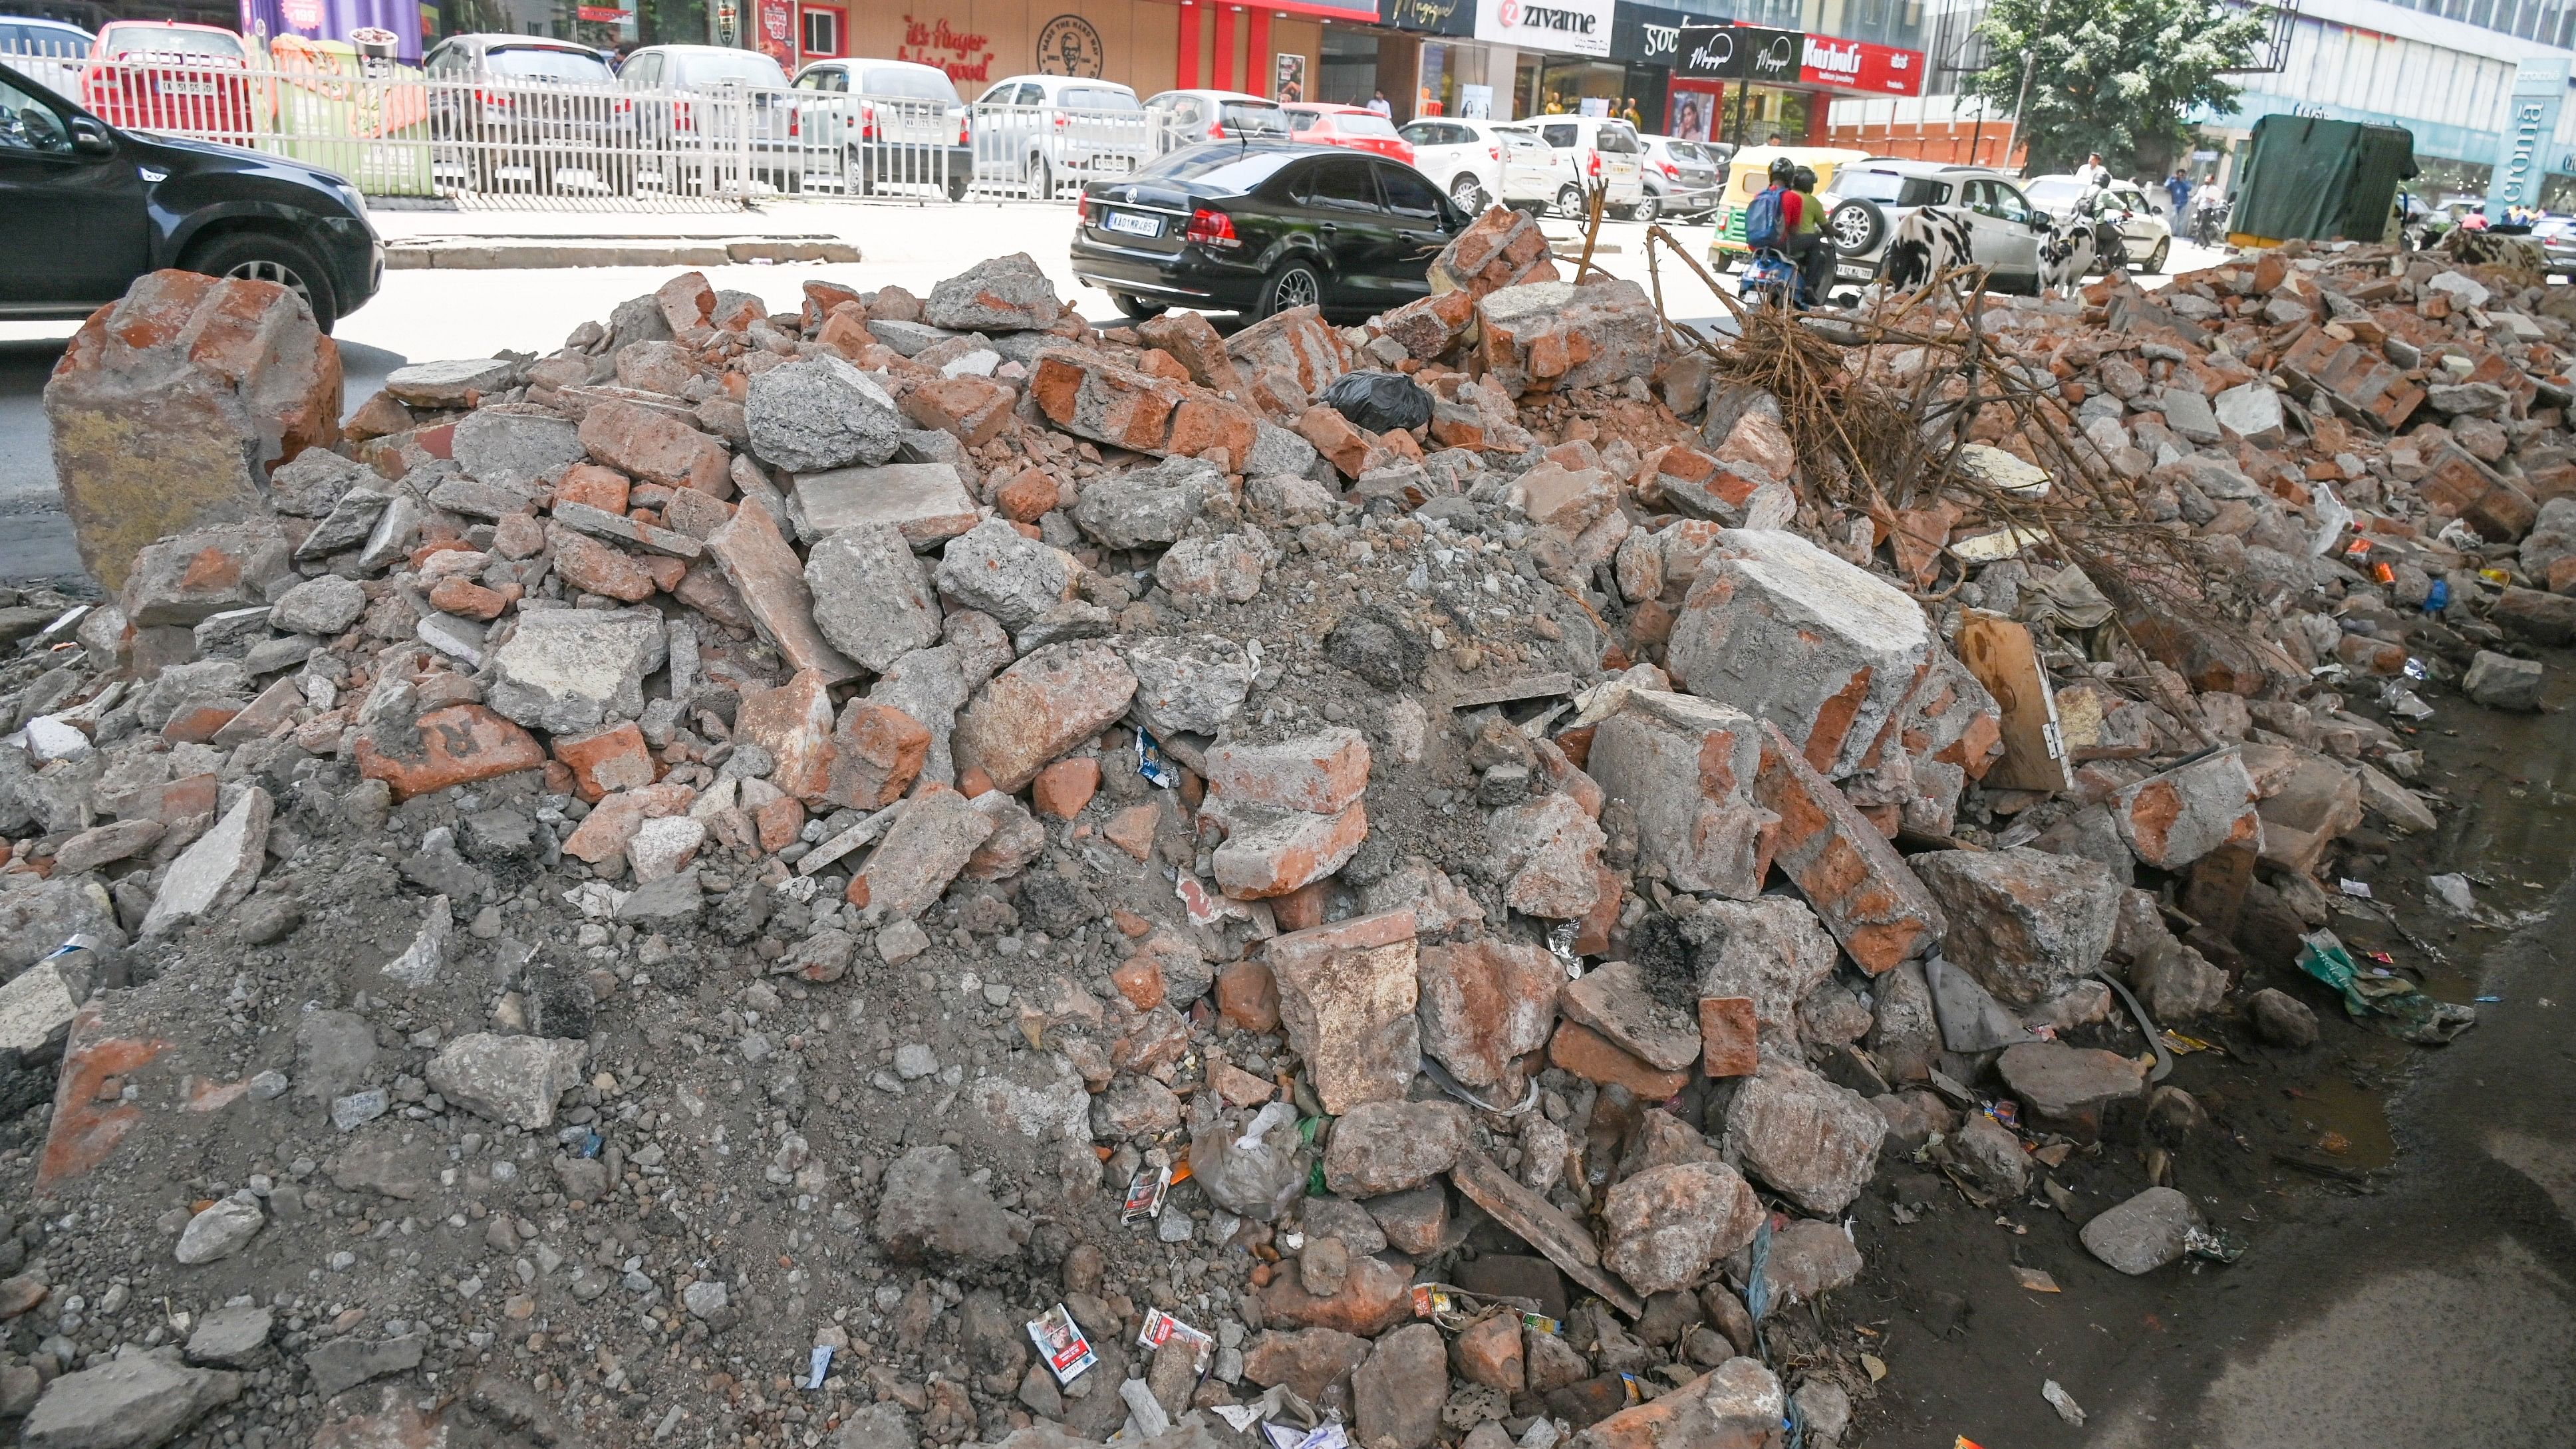 <div class="paragraphs"><p>Building debris gets dumped everywhere, including footpaths, affecting pedestrians and eating into road space. There are no takers for damaged red brick waste.</p></div>